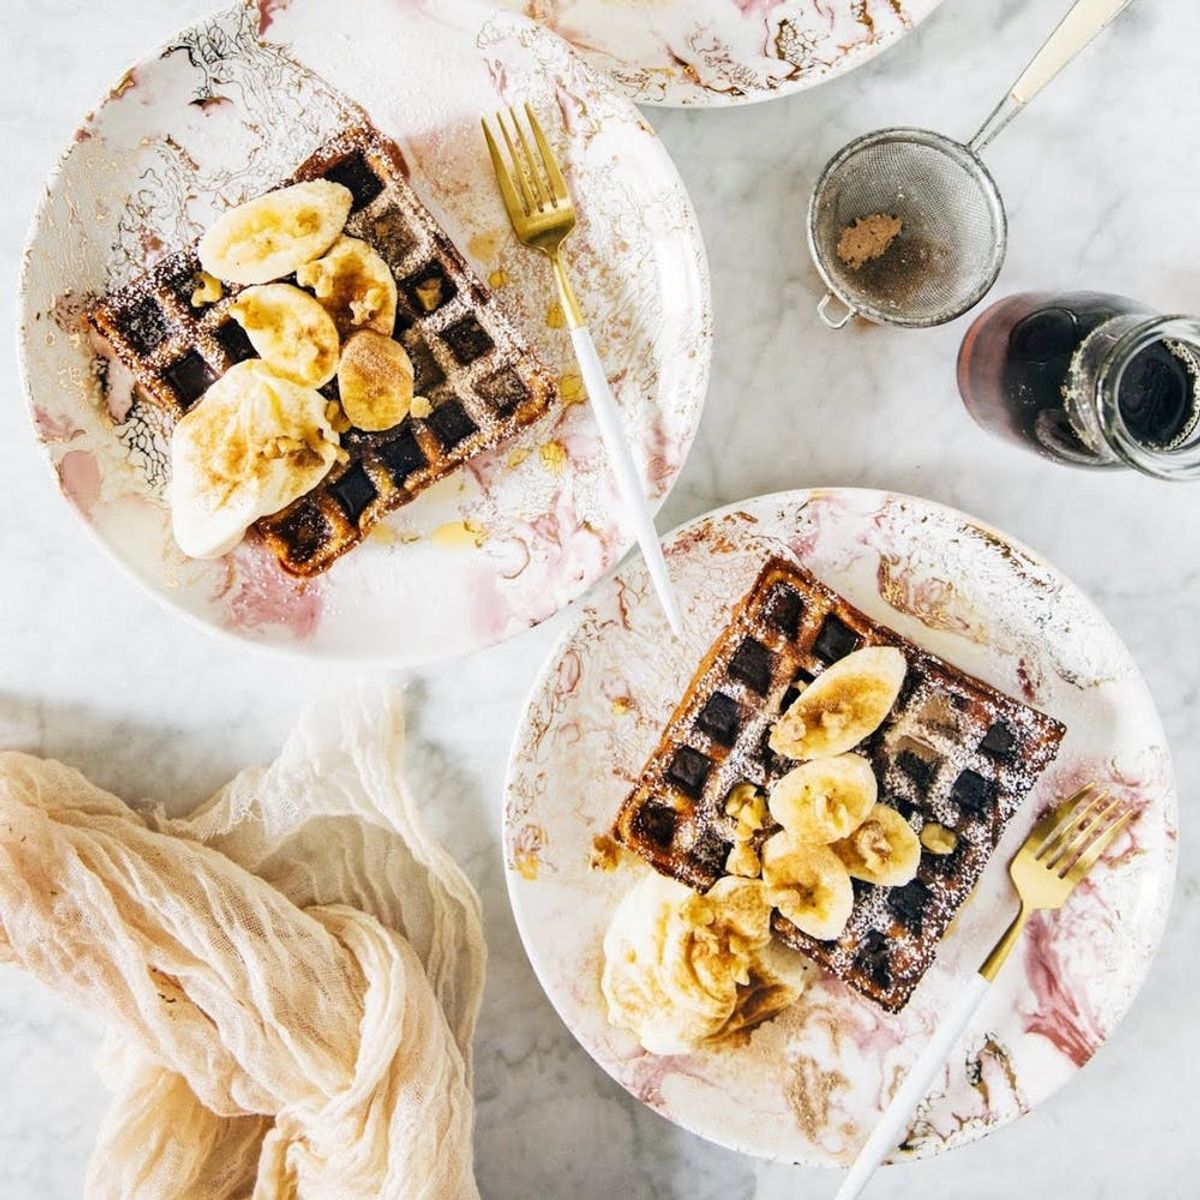 This waffle paleo breakfast rests on a white plate with chocolate sauce, bananas, and whip cream